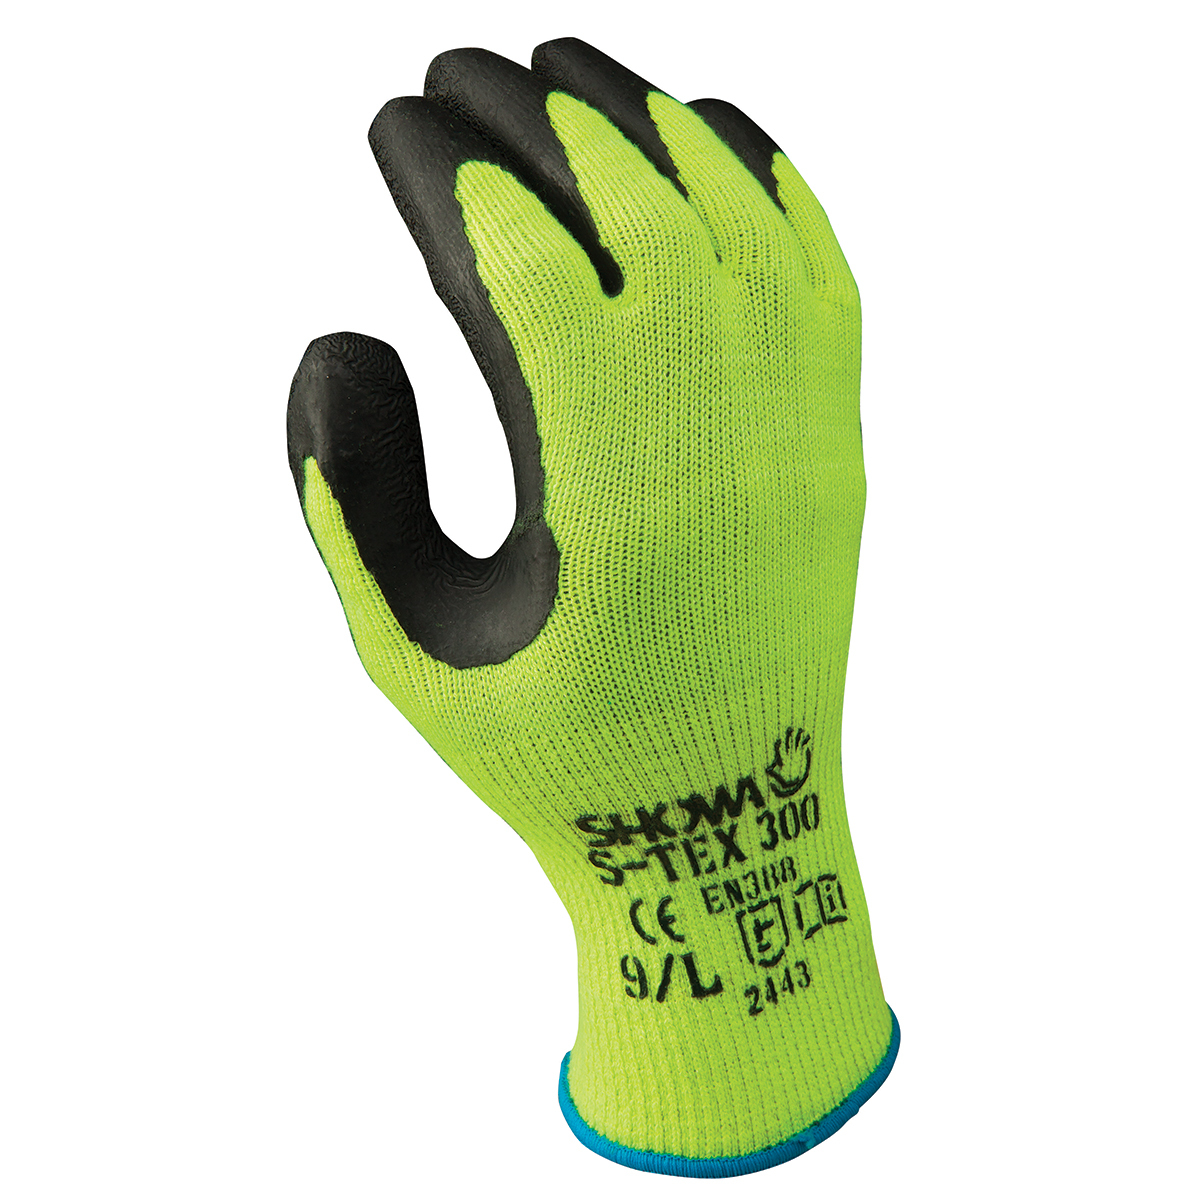 SHOWA® S-TEX® 300 10 Gauge Hagane Coil® And Polyester And Stainless Steel Cut Resistant Gloves With Rubber Coating